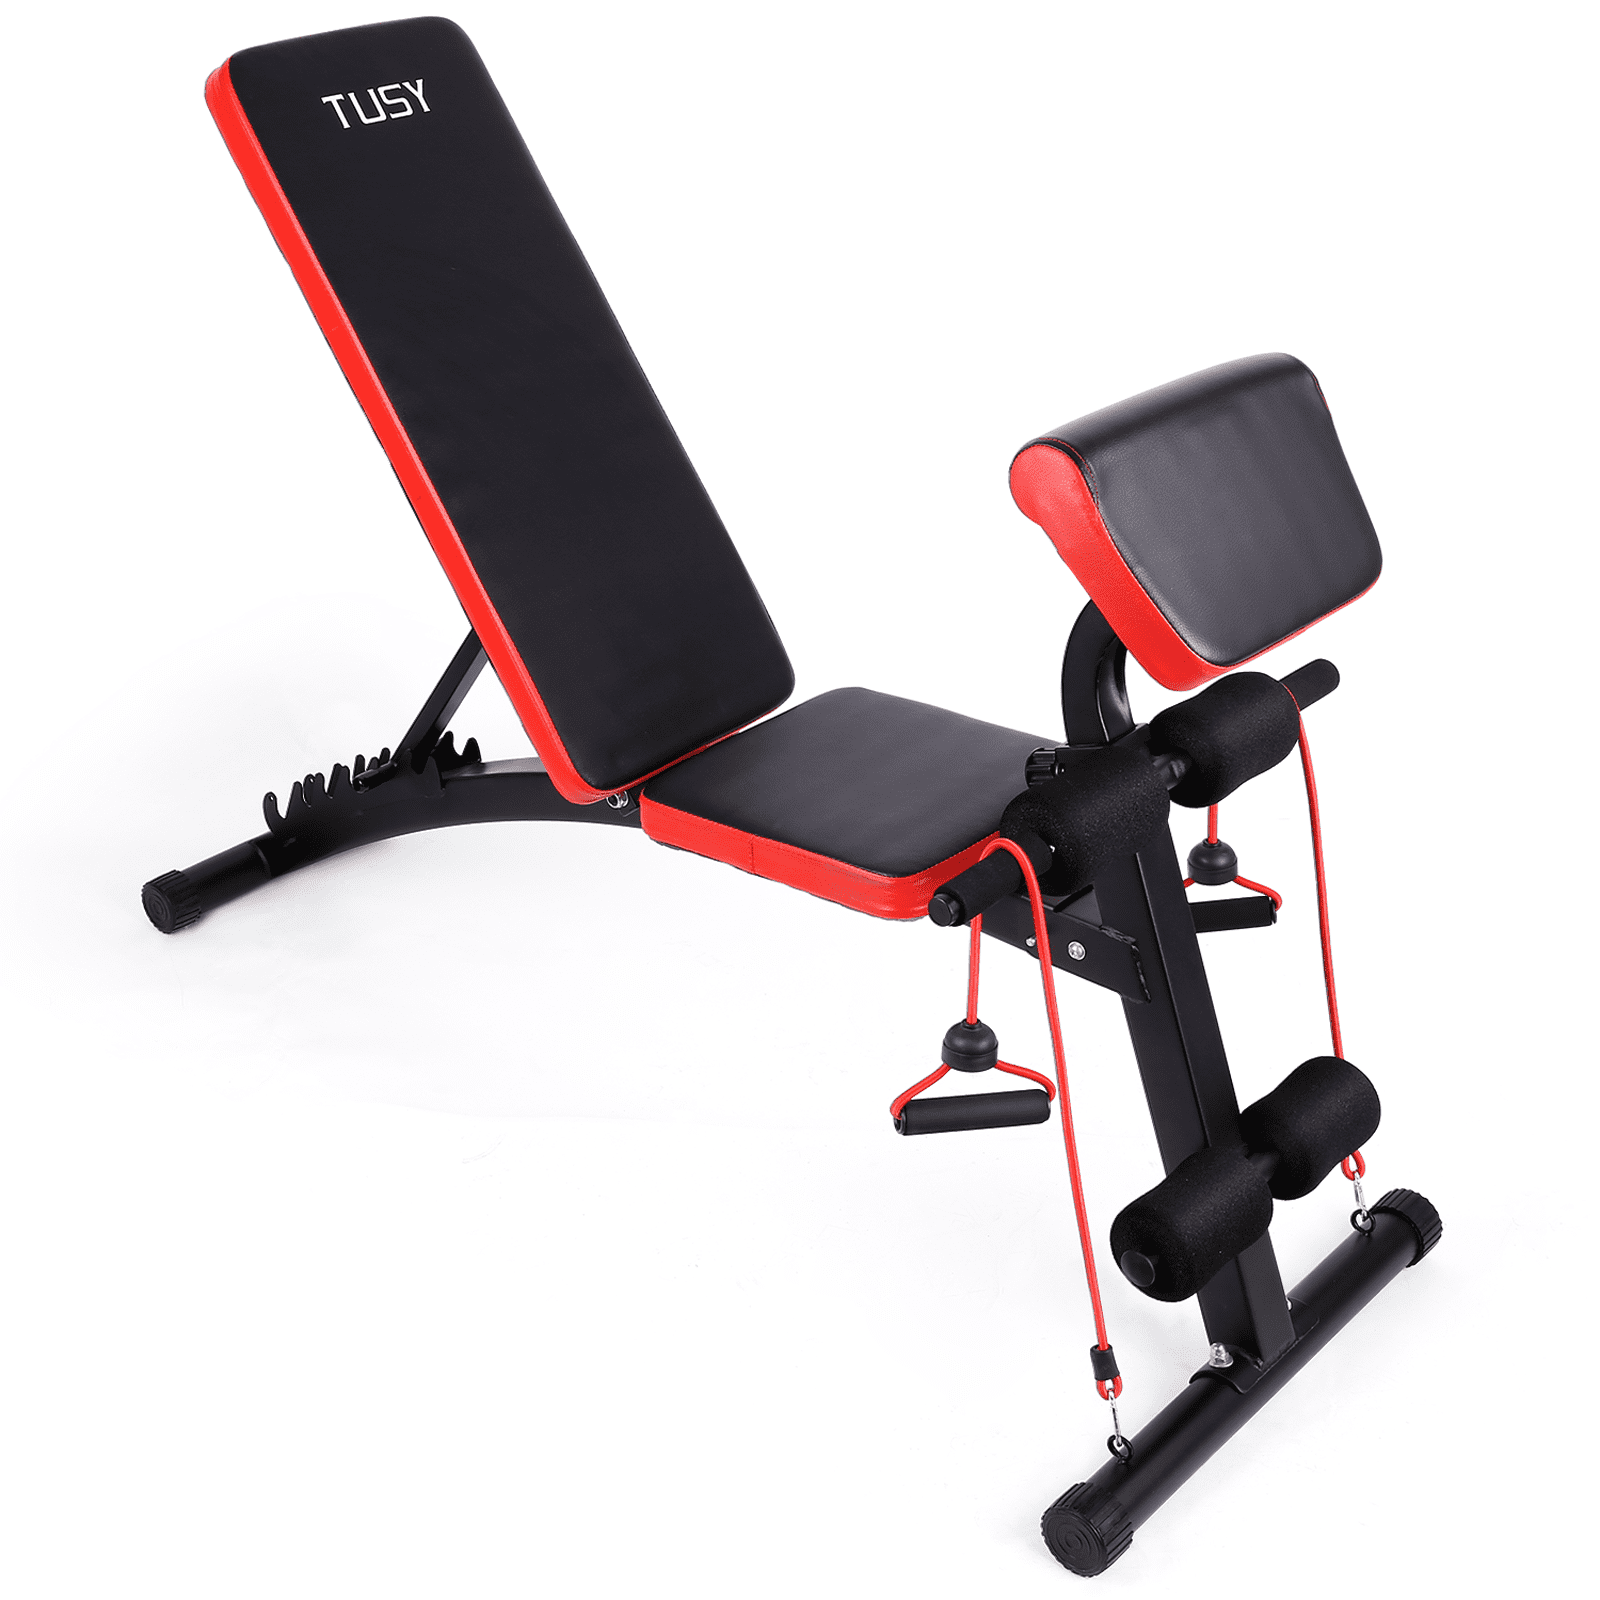 Weight Bench with Strength Training Adjustable Benches for Full Body Workout 